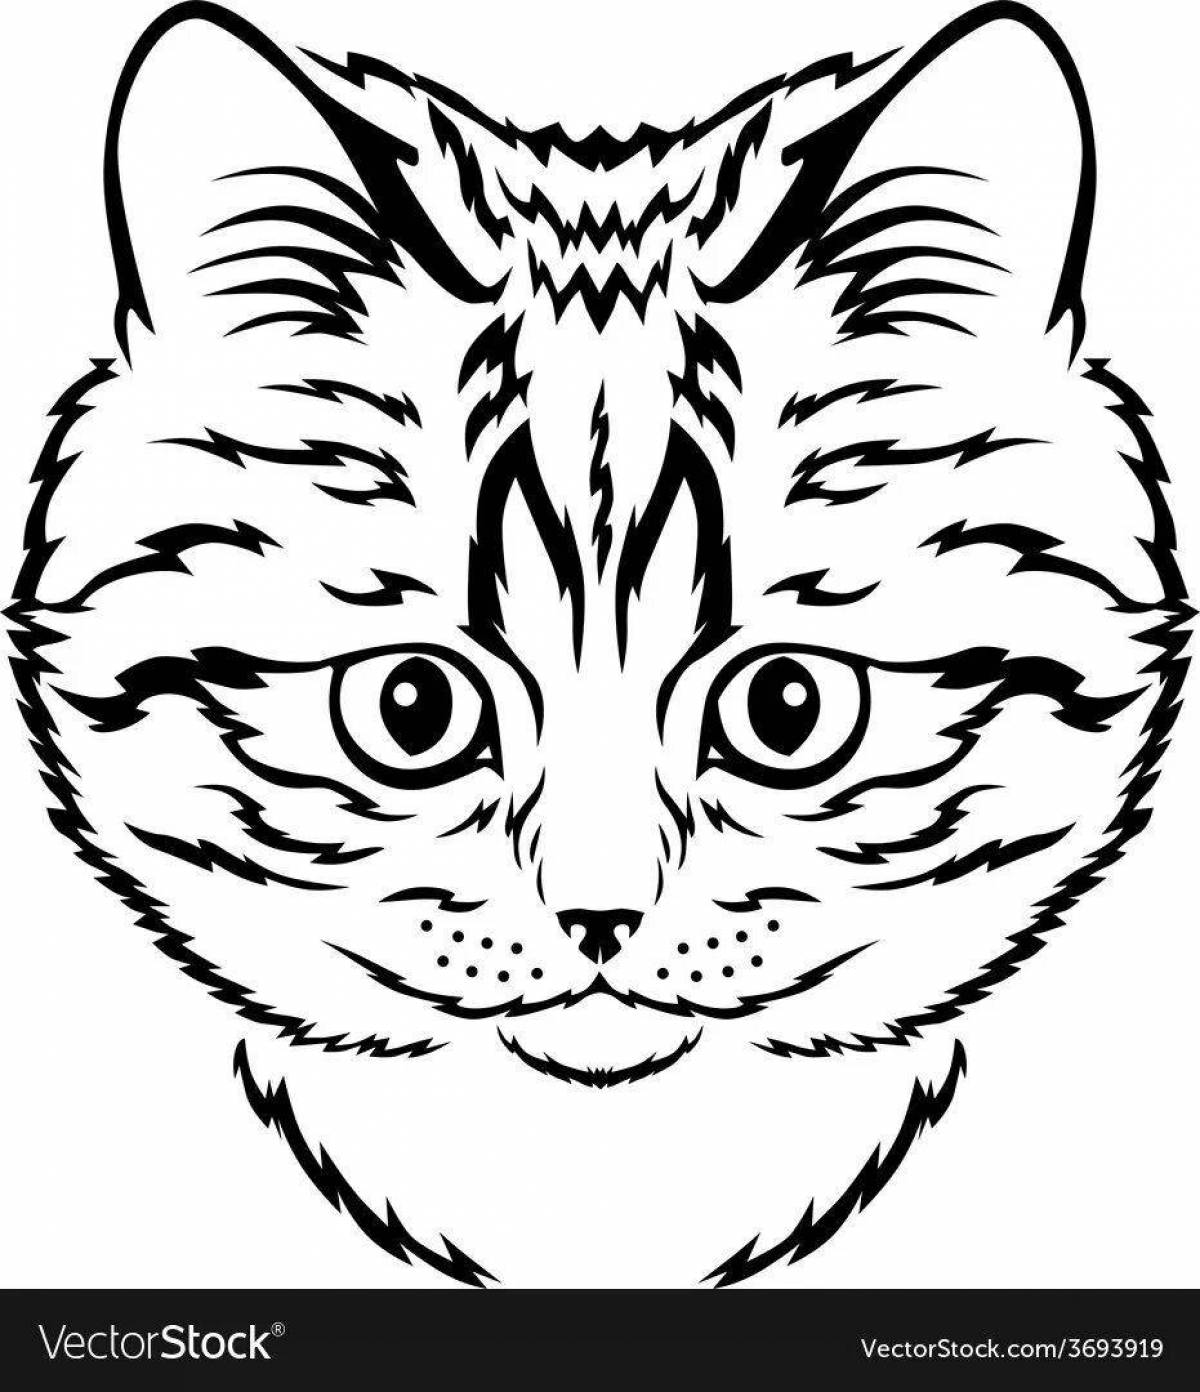 Coloring page of a muzzle of a fluffy cat